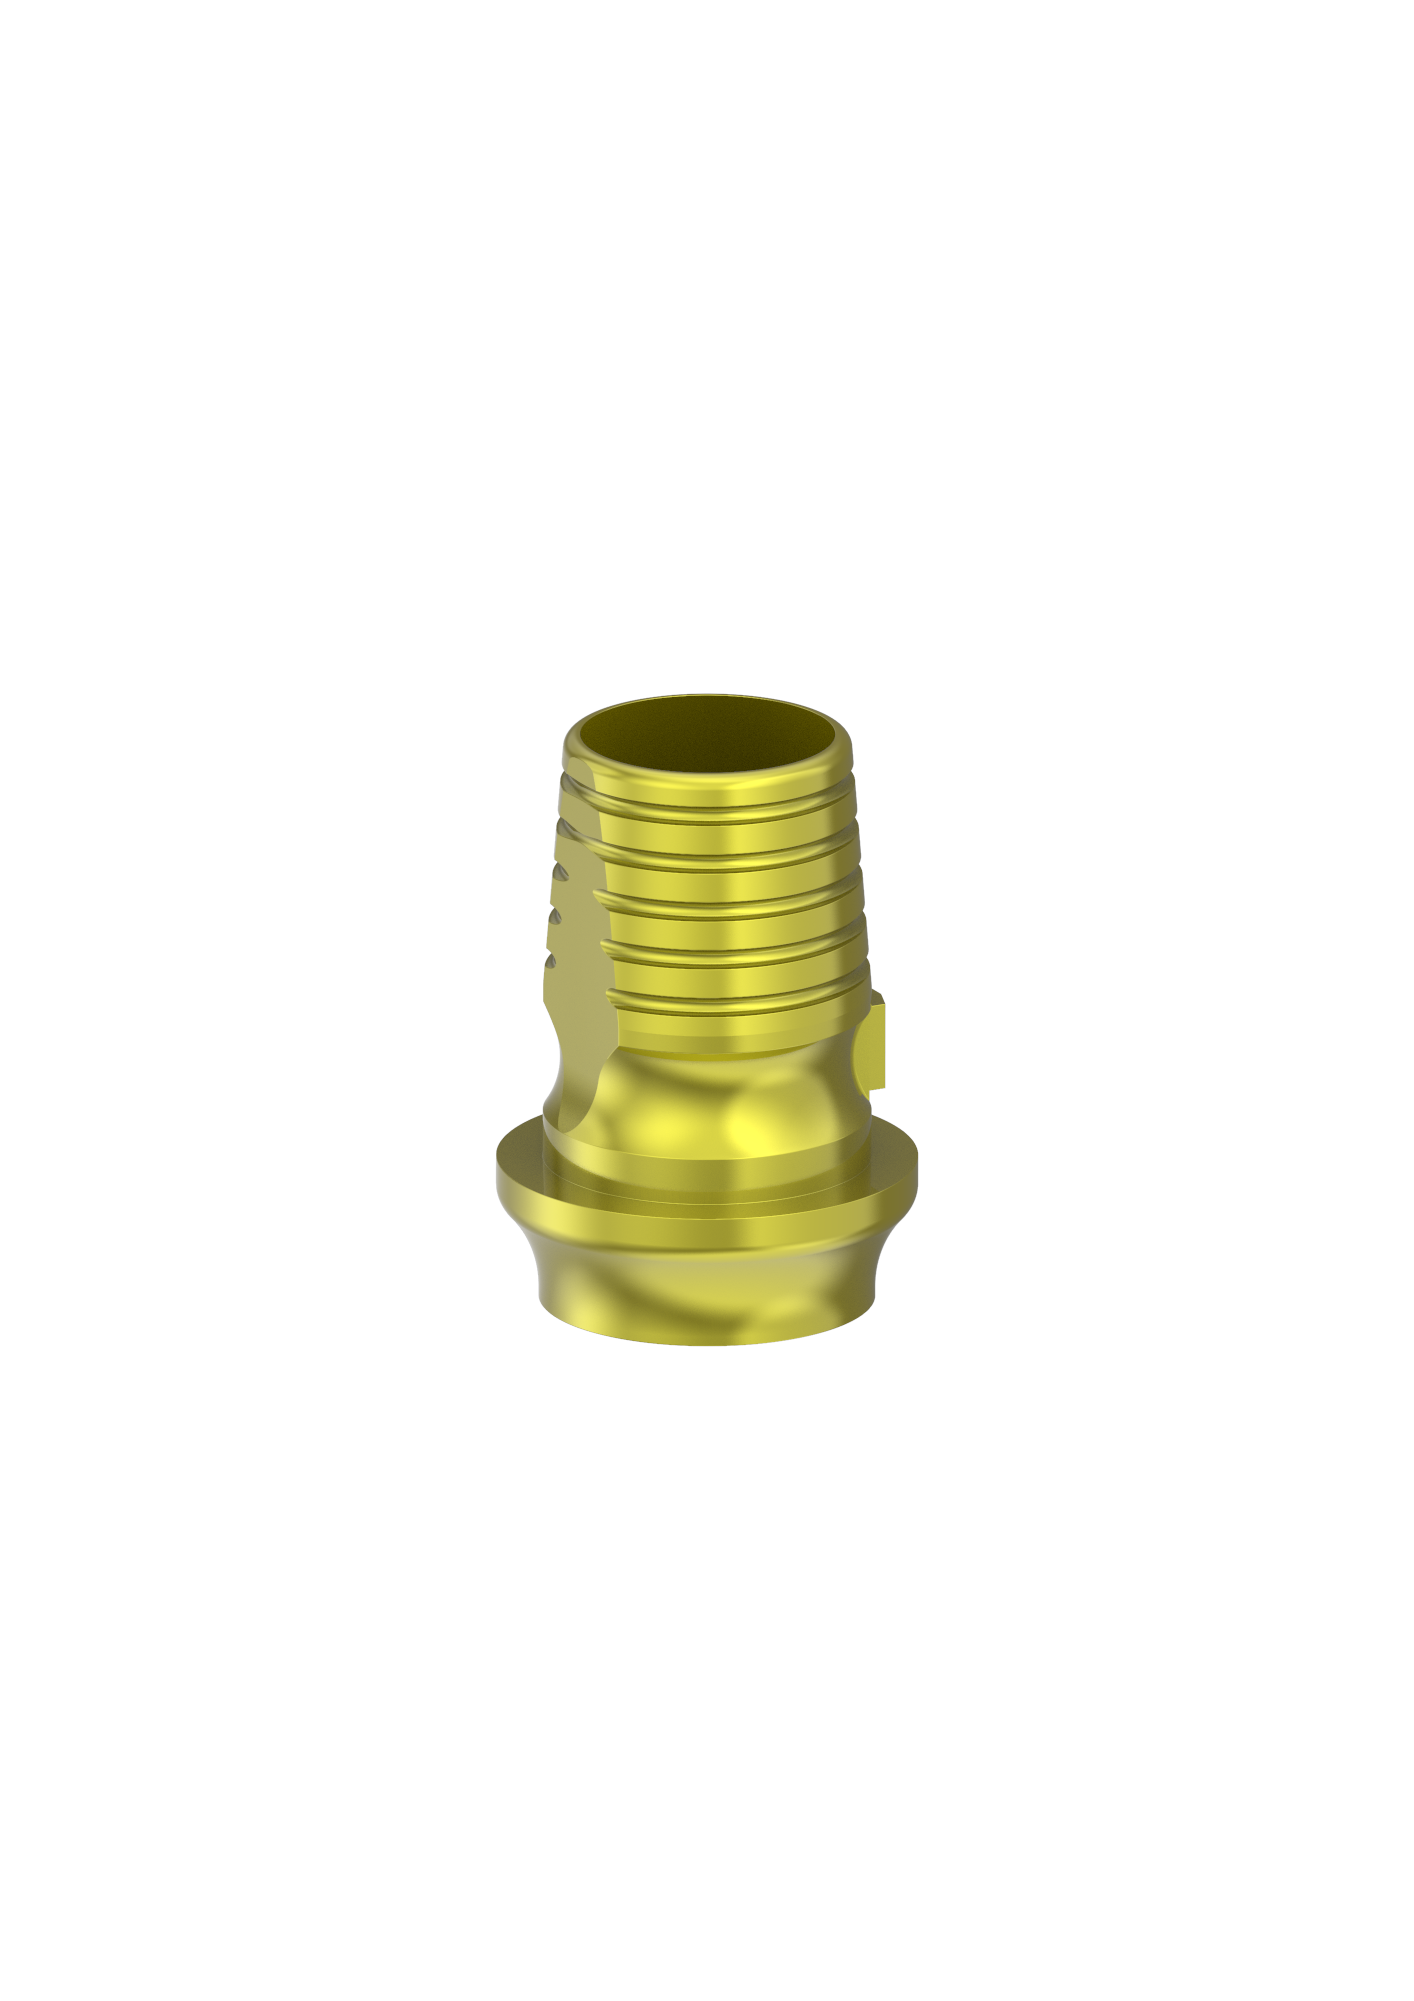 Ext Hex Abutment Base Ti 3.25, 1.5mm Collar Engaging